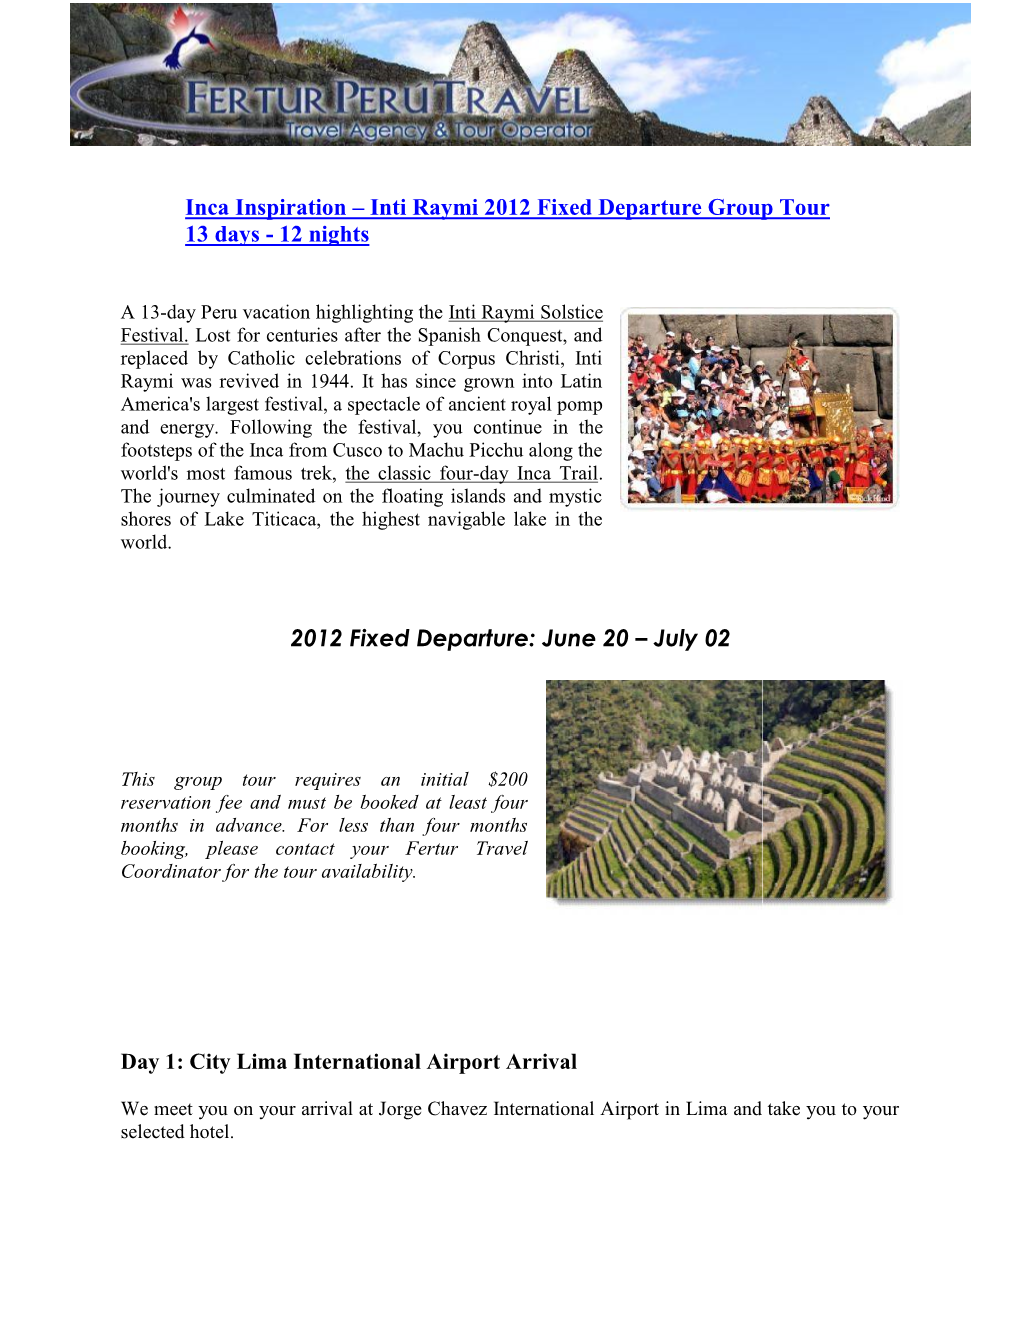 Inca Inspiration with Inti Raymi Fixed Departure Group Tour 13 Days.Pdf